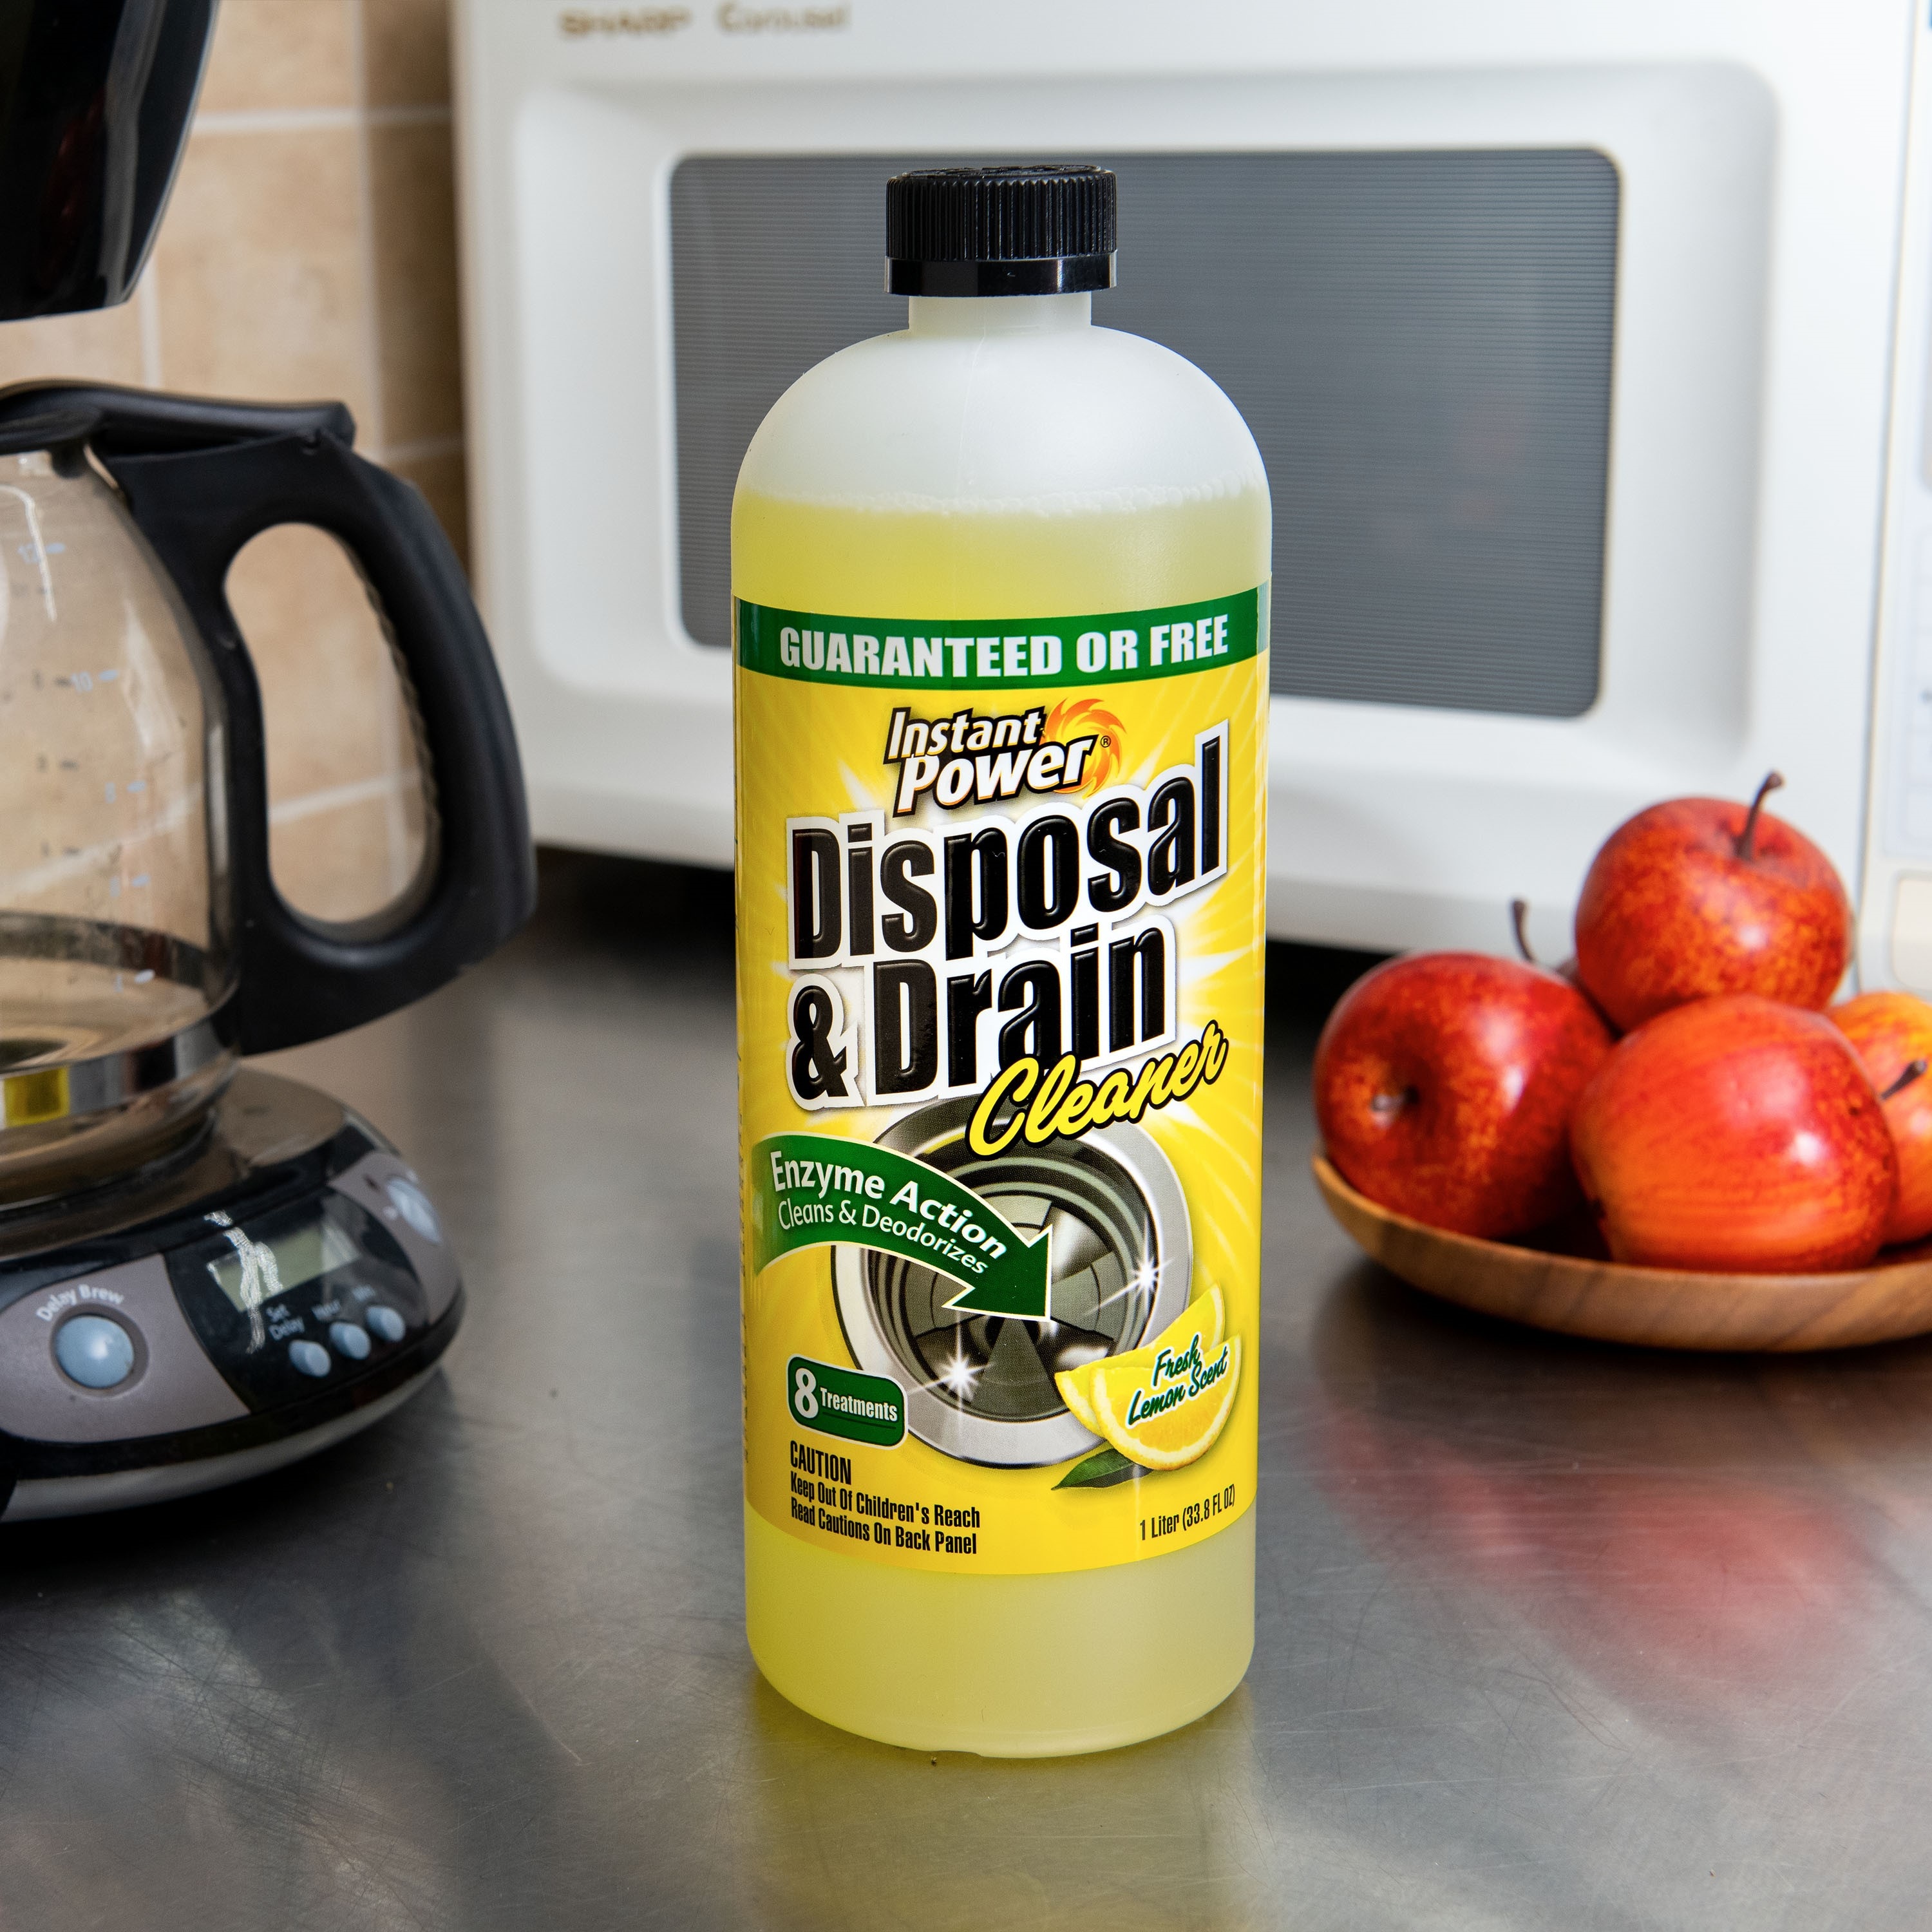 Disposal & Drain Cleaner - Instant Power